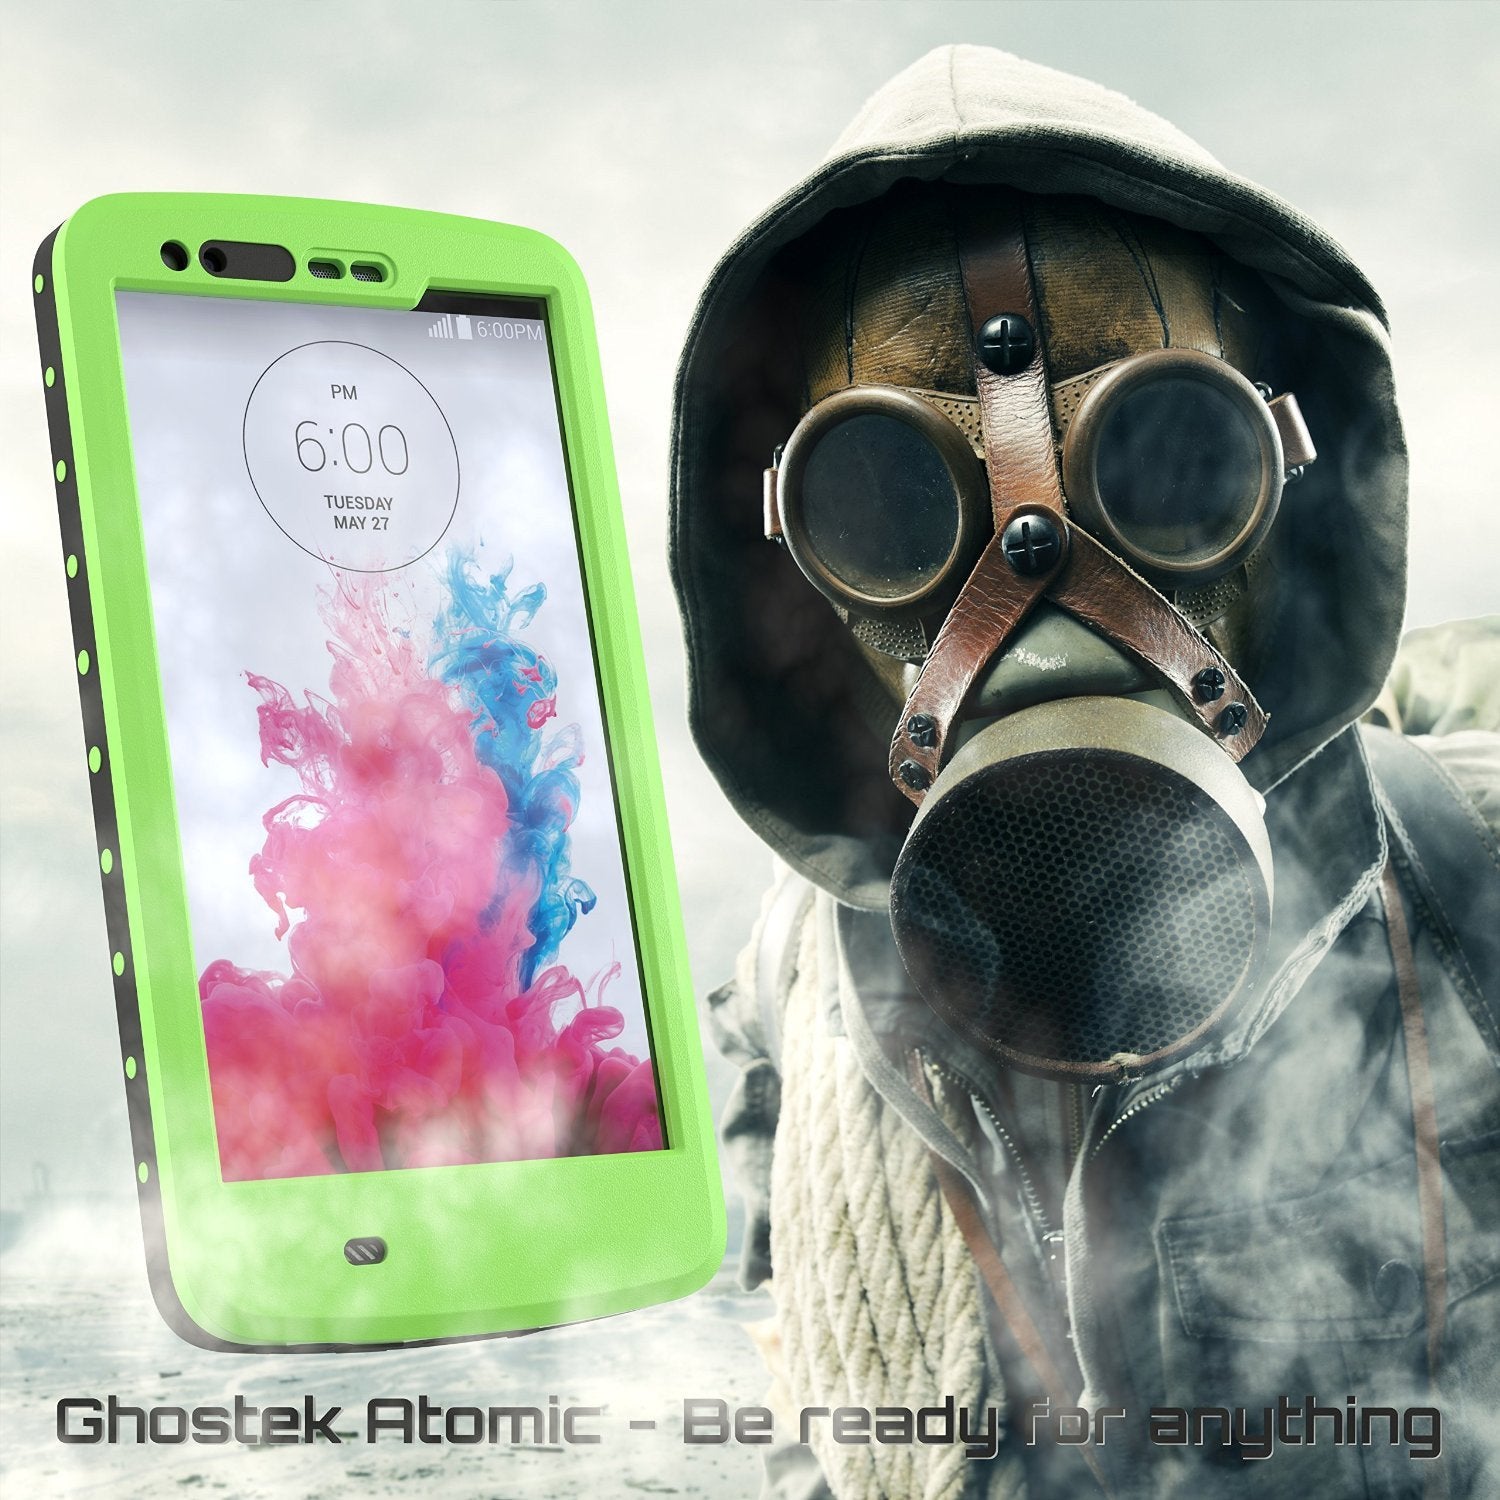 LG G3 Waterproof Case, Ghostek Atomic Green W/ Attached Screen Protector Slim Fitted